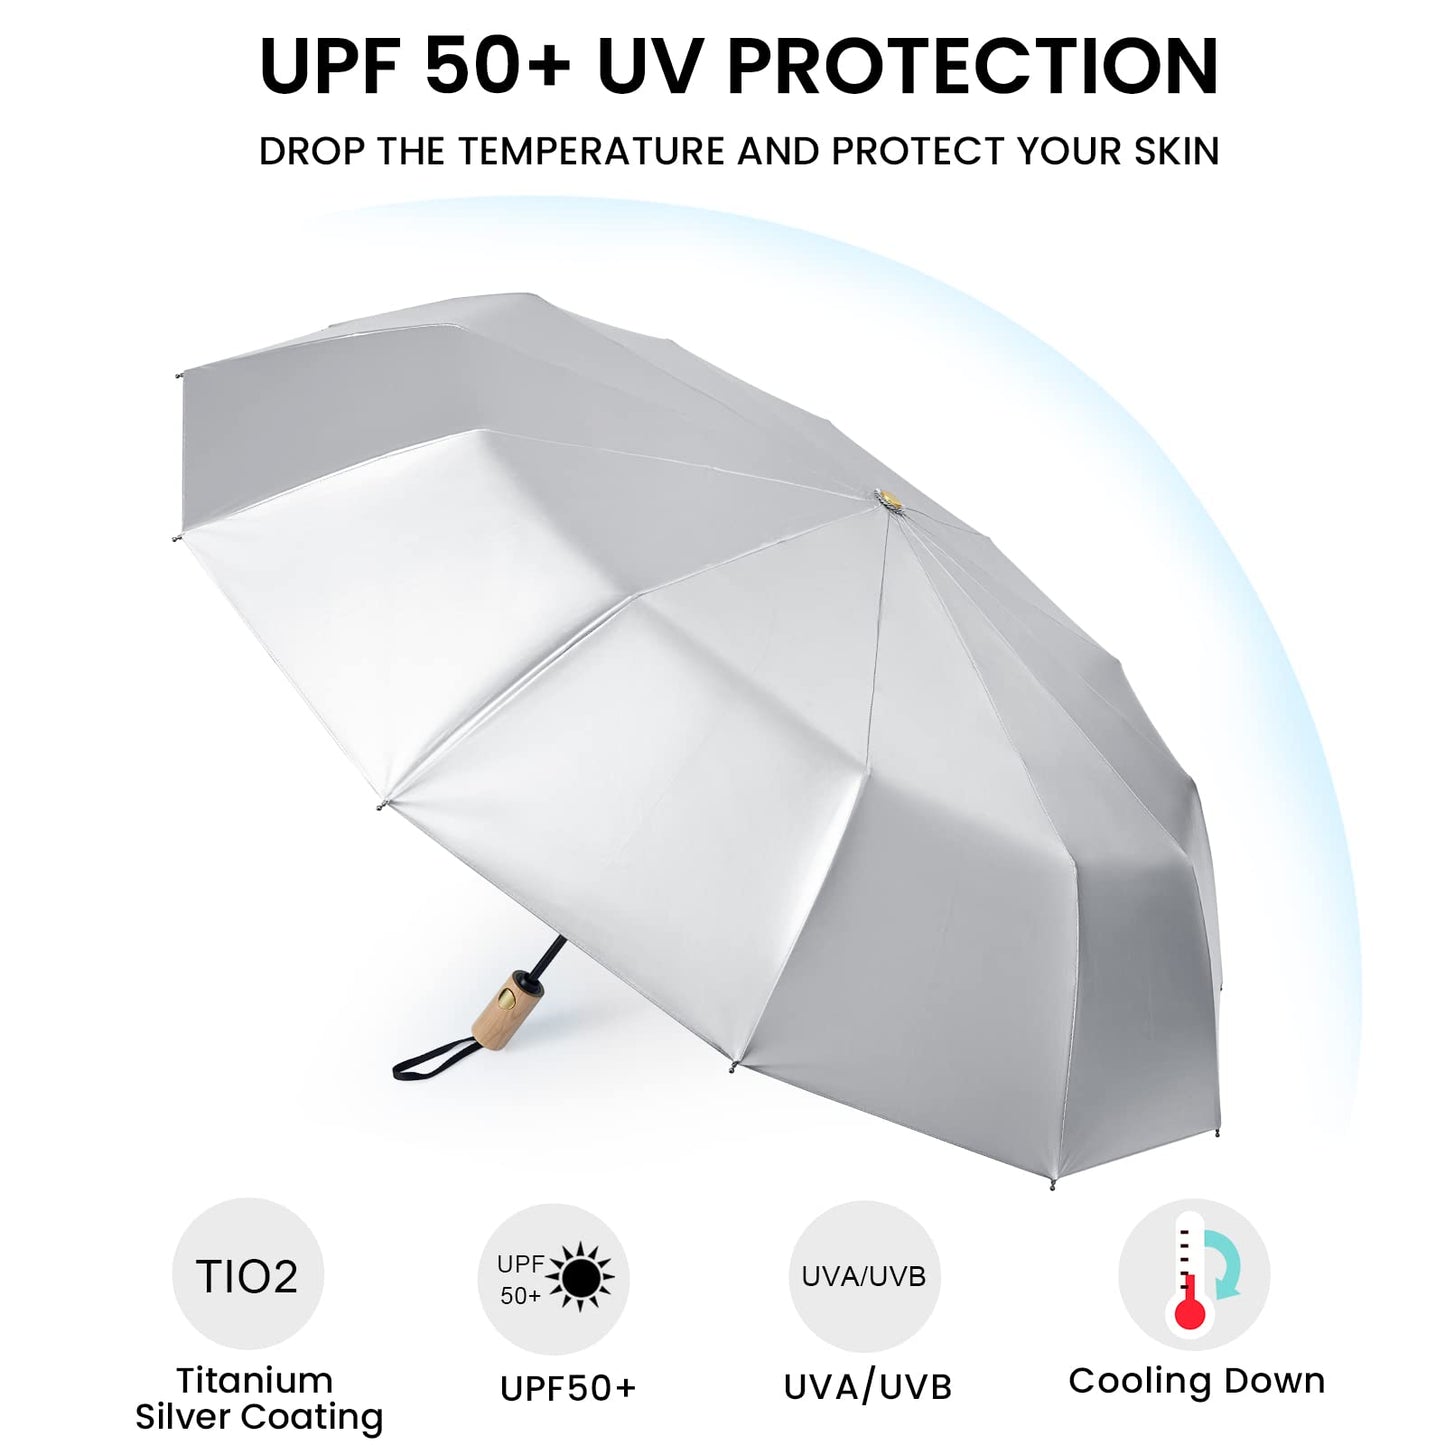 G4Free 46 Inch UPF 50+ UV Protection Large Travel Umbrella with Wooden Handle